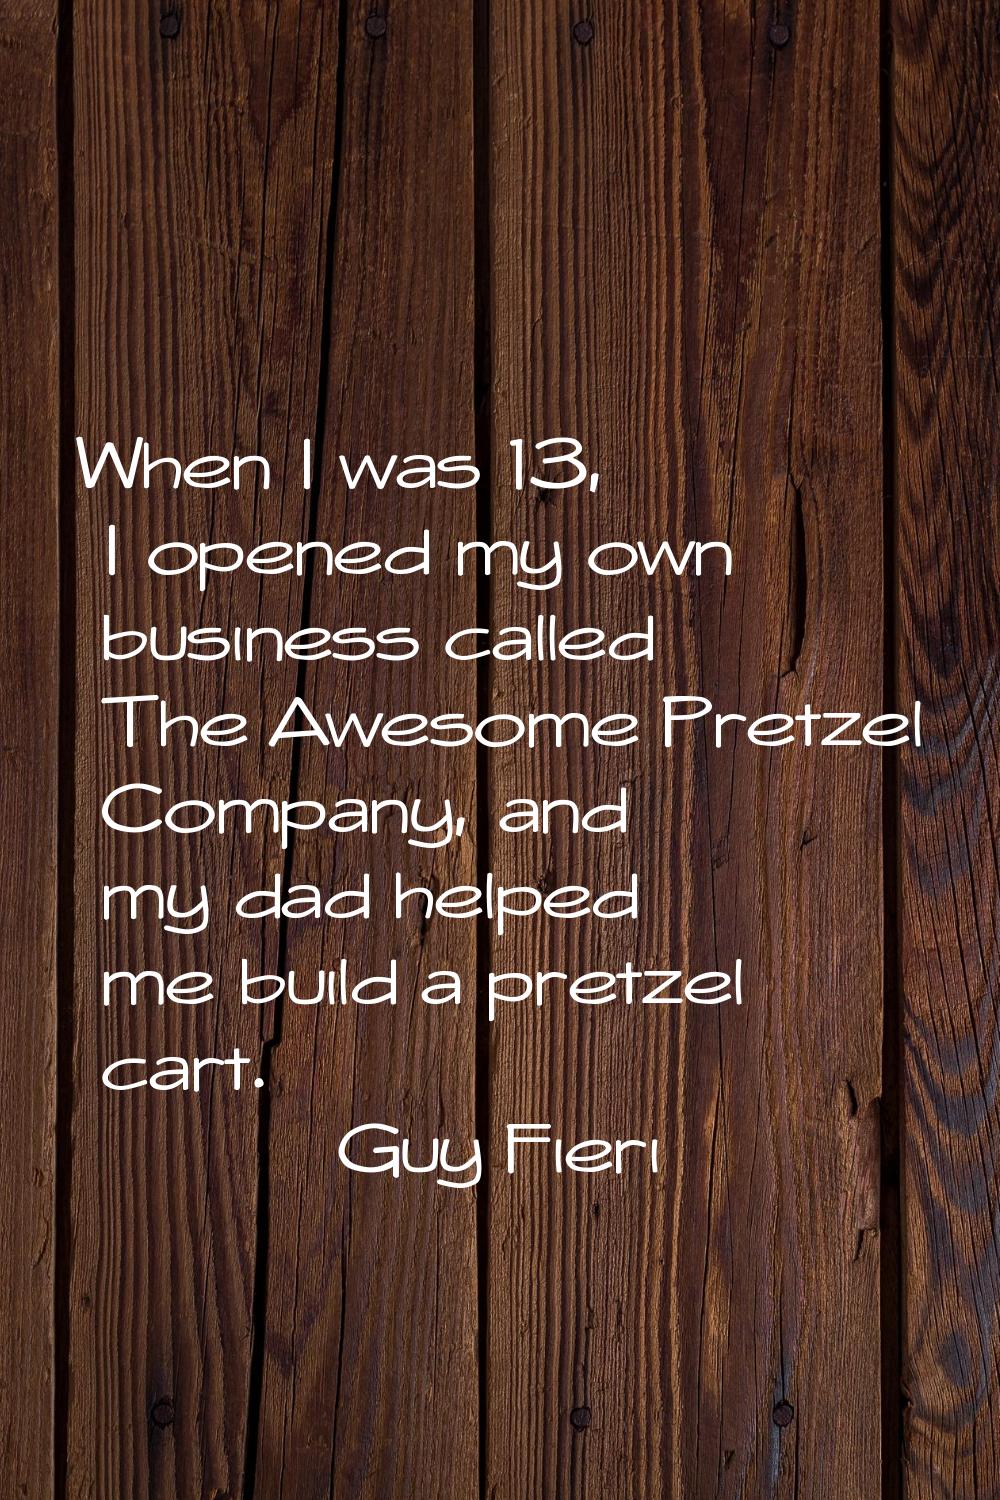 When I was 13, I opened my own business called The Awesome Pretzel Company, and my dad helped me bu